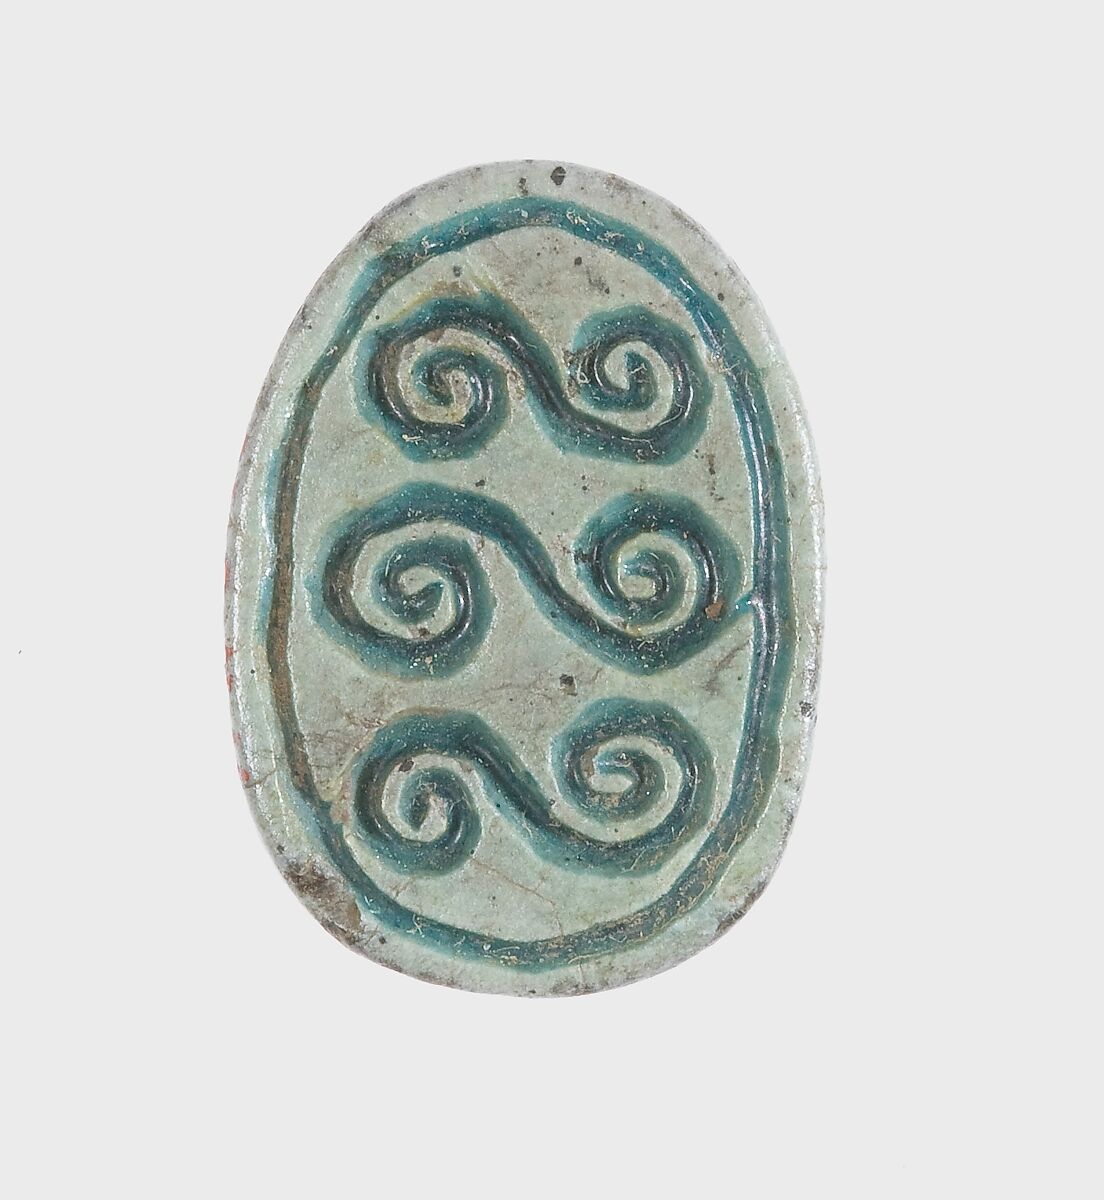 Scarab Inscribed with S-Shaped Spirals, Steatite, glazed 